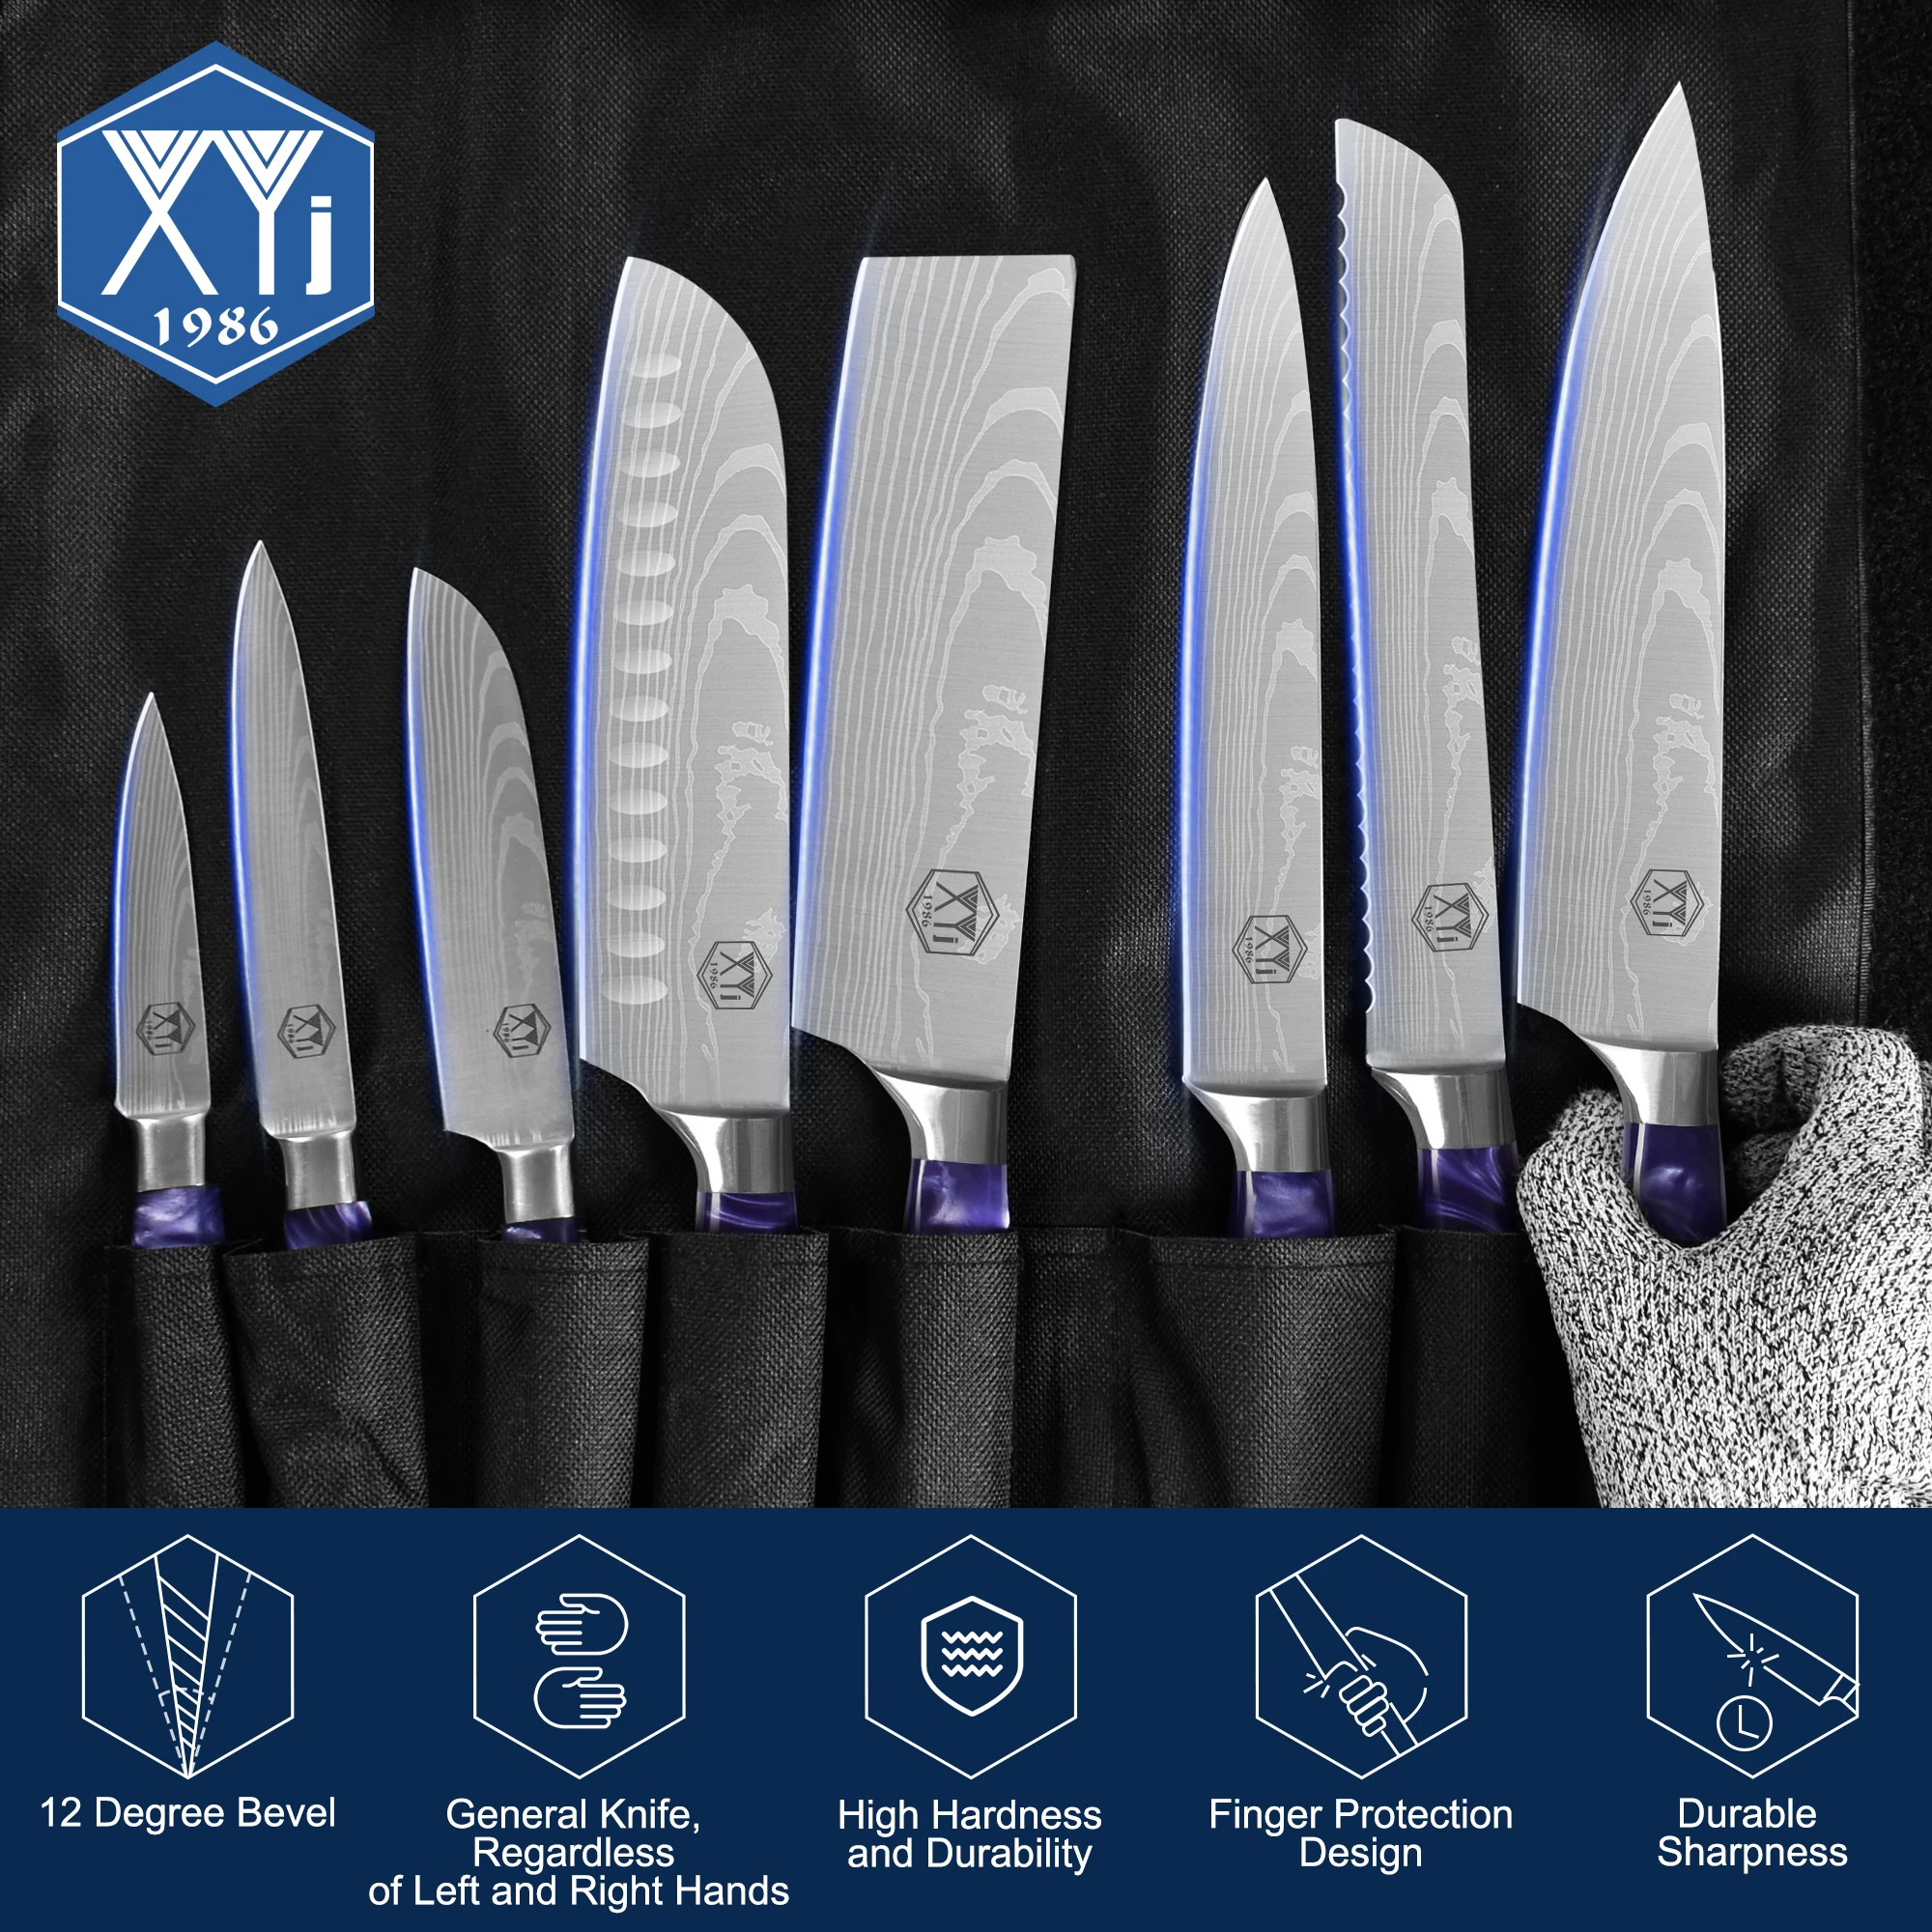 https://ae01.alicdn.com/kf/S5e907c1c8d104164aa99bb25972c5400O/XYj-Kitchen-Knife-Set-Professional-8Pcs-Knives-7CR17-Stainless-Steel-Japanese-Chef-Knives-Set-With-Purple.jpg